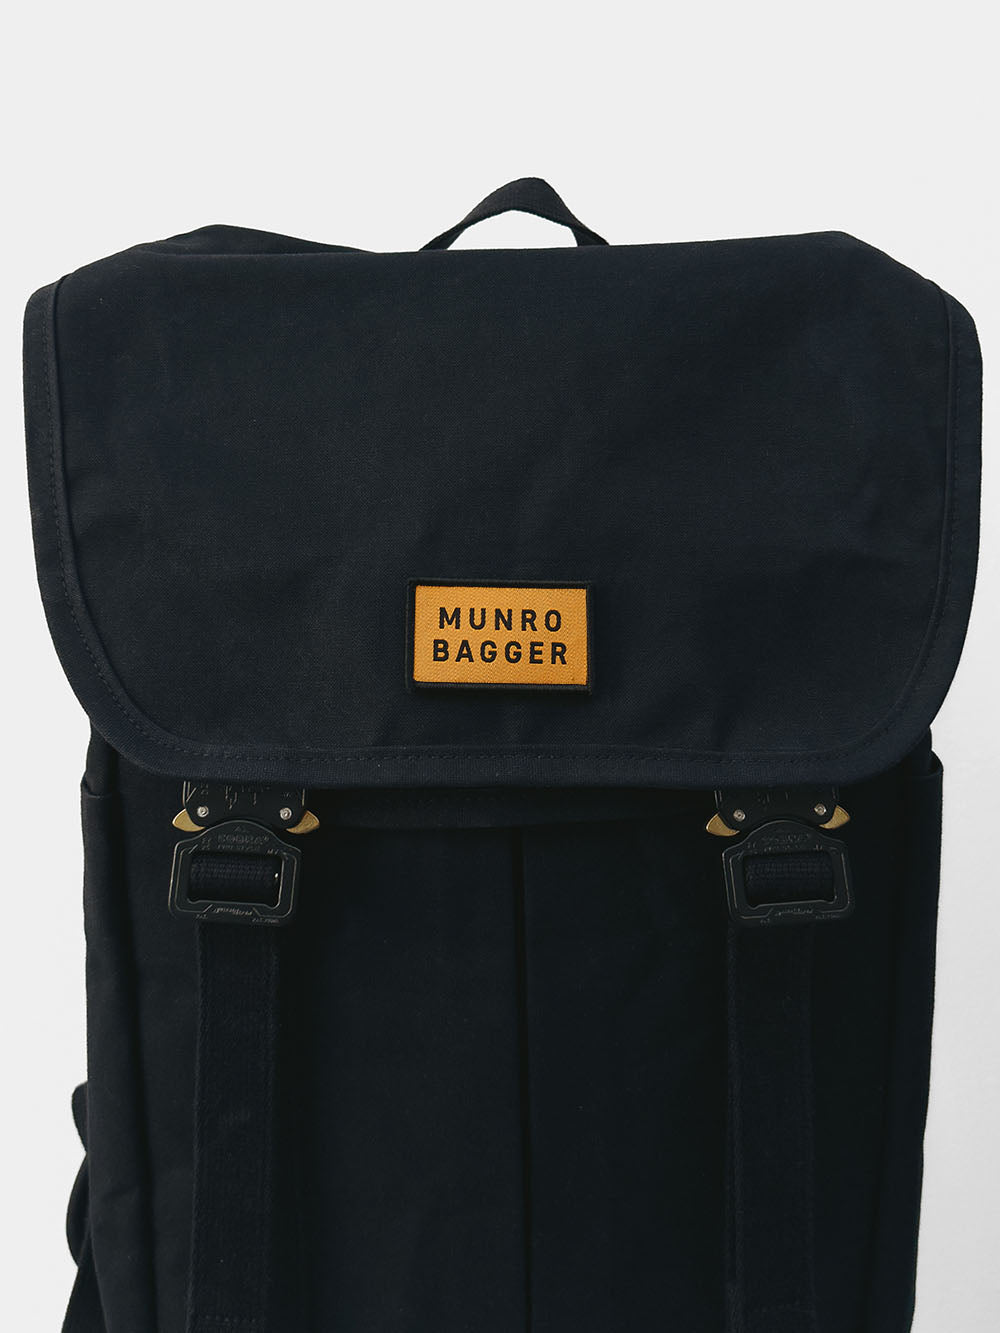 Munro Bagger Patch